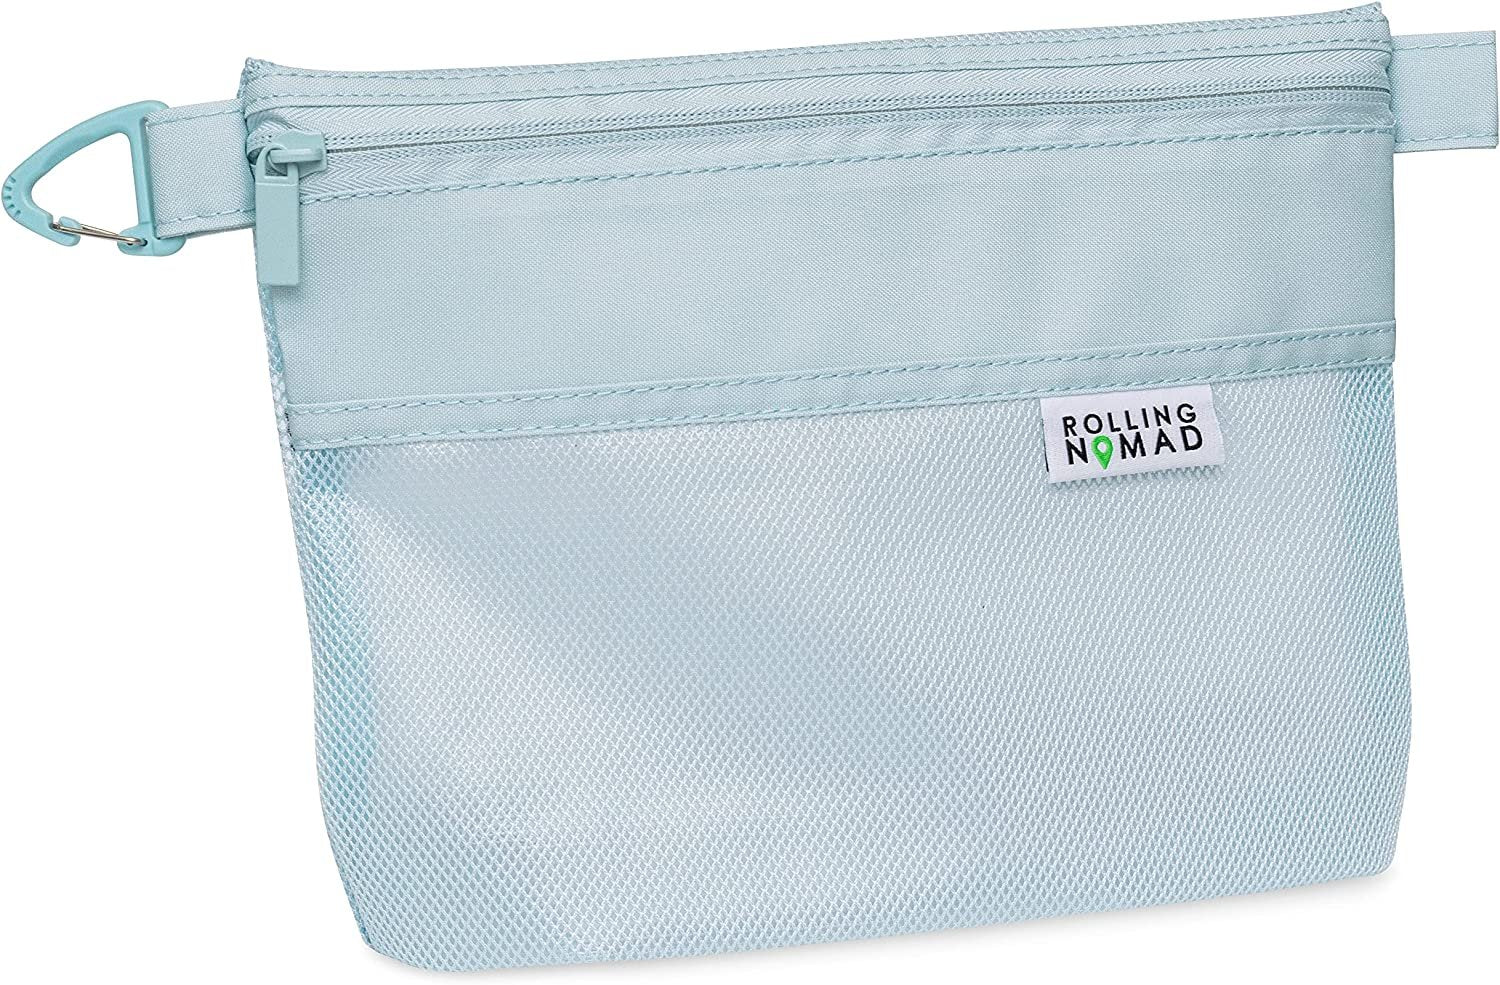 Mesh Zipper Pouch - Medium Light Blue Water Resistant Storage & Toiletry Bag with Zipper, Durable Clip for Travel, Luggage, Beach, Toiletries, Office Supplies Organizer, Pencil Holder - 10.2x7.6x0.4